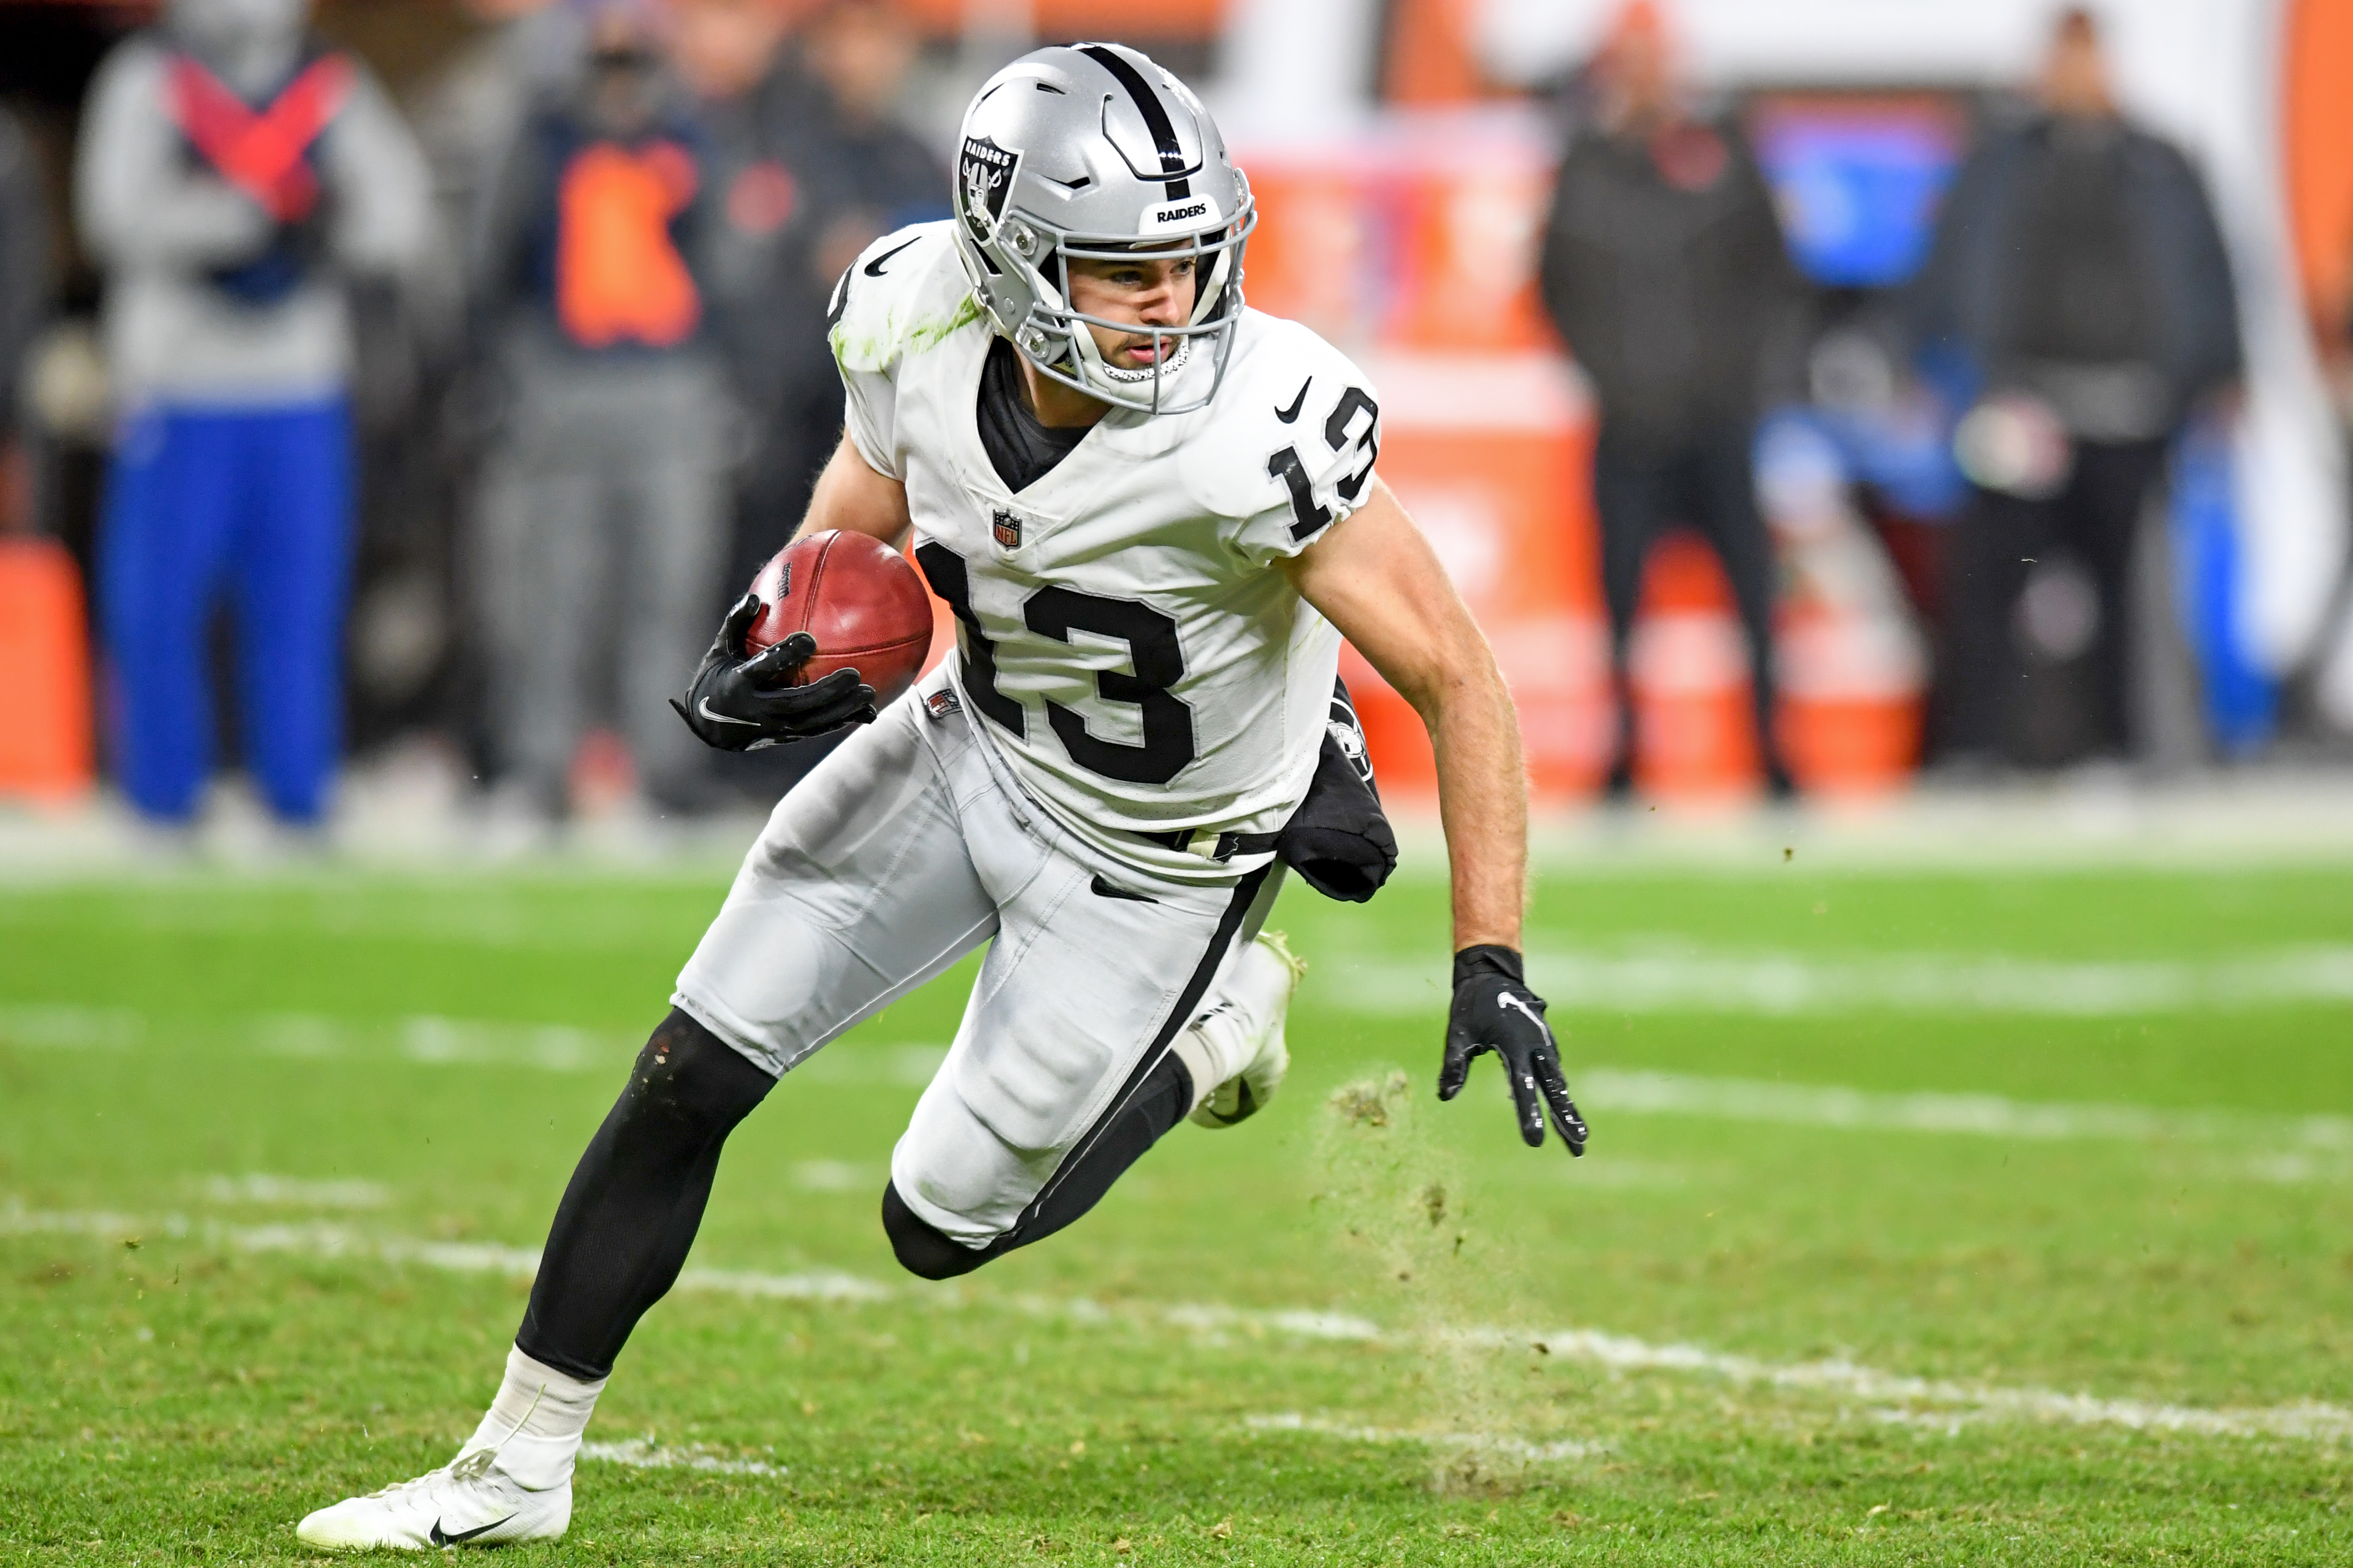 Hunter Renfrow #13 of the Las Vegas Raiders returns a punt during the second half against the Cleveland Browns at FirstEnergy Stadium in Cleveland, Ohio.